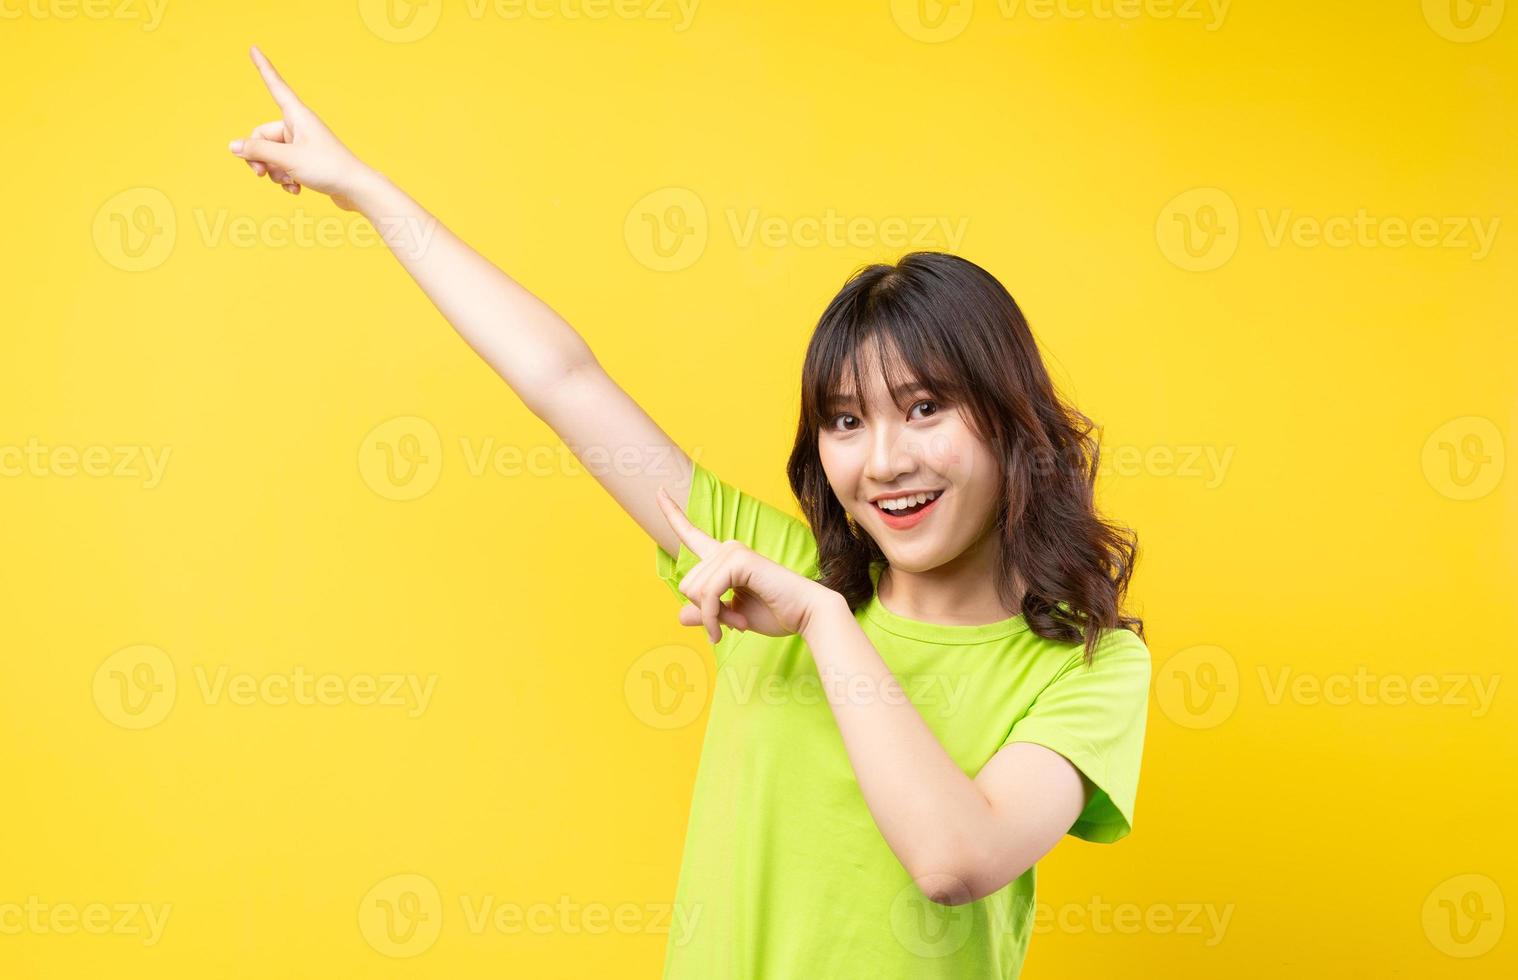 Young Asian girl with expressions and gestures on background photo